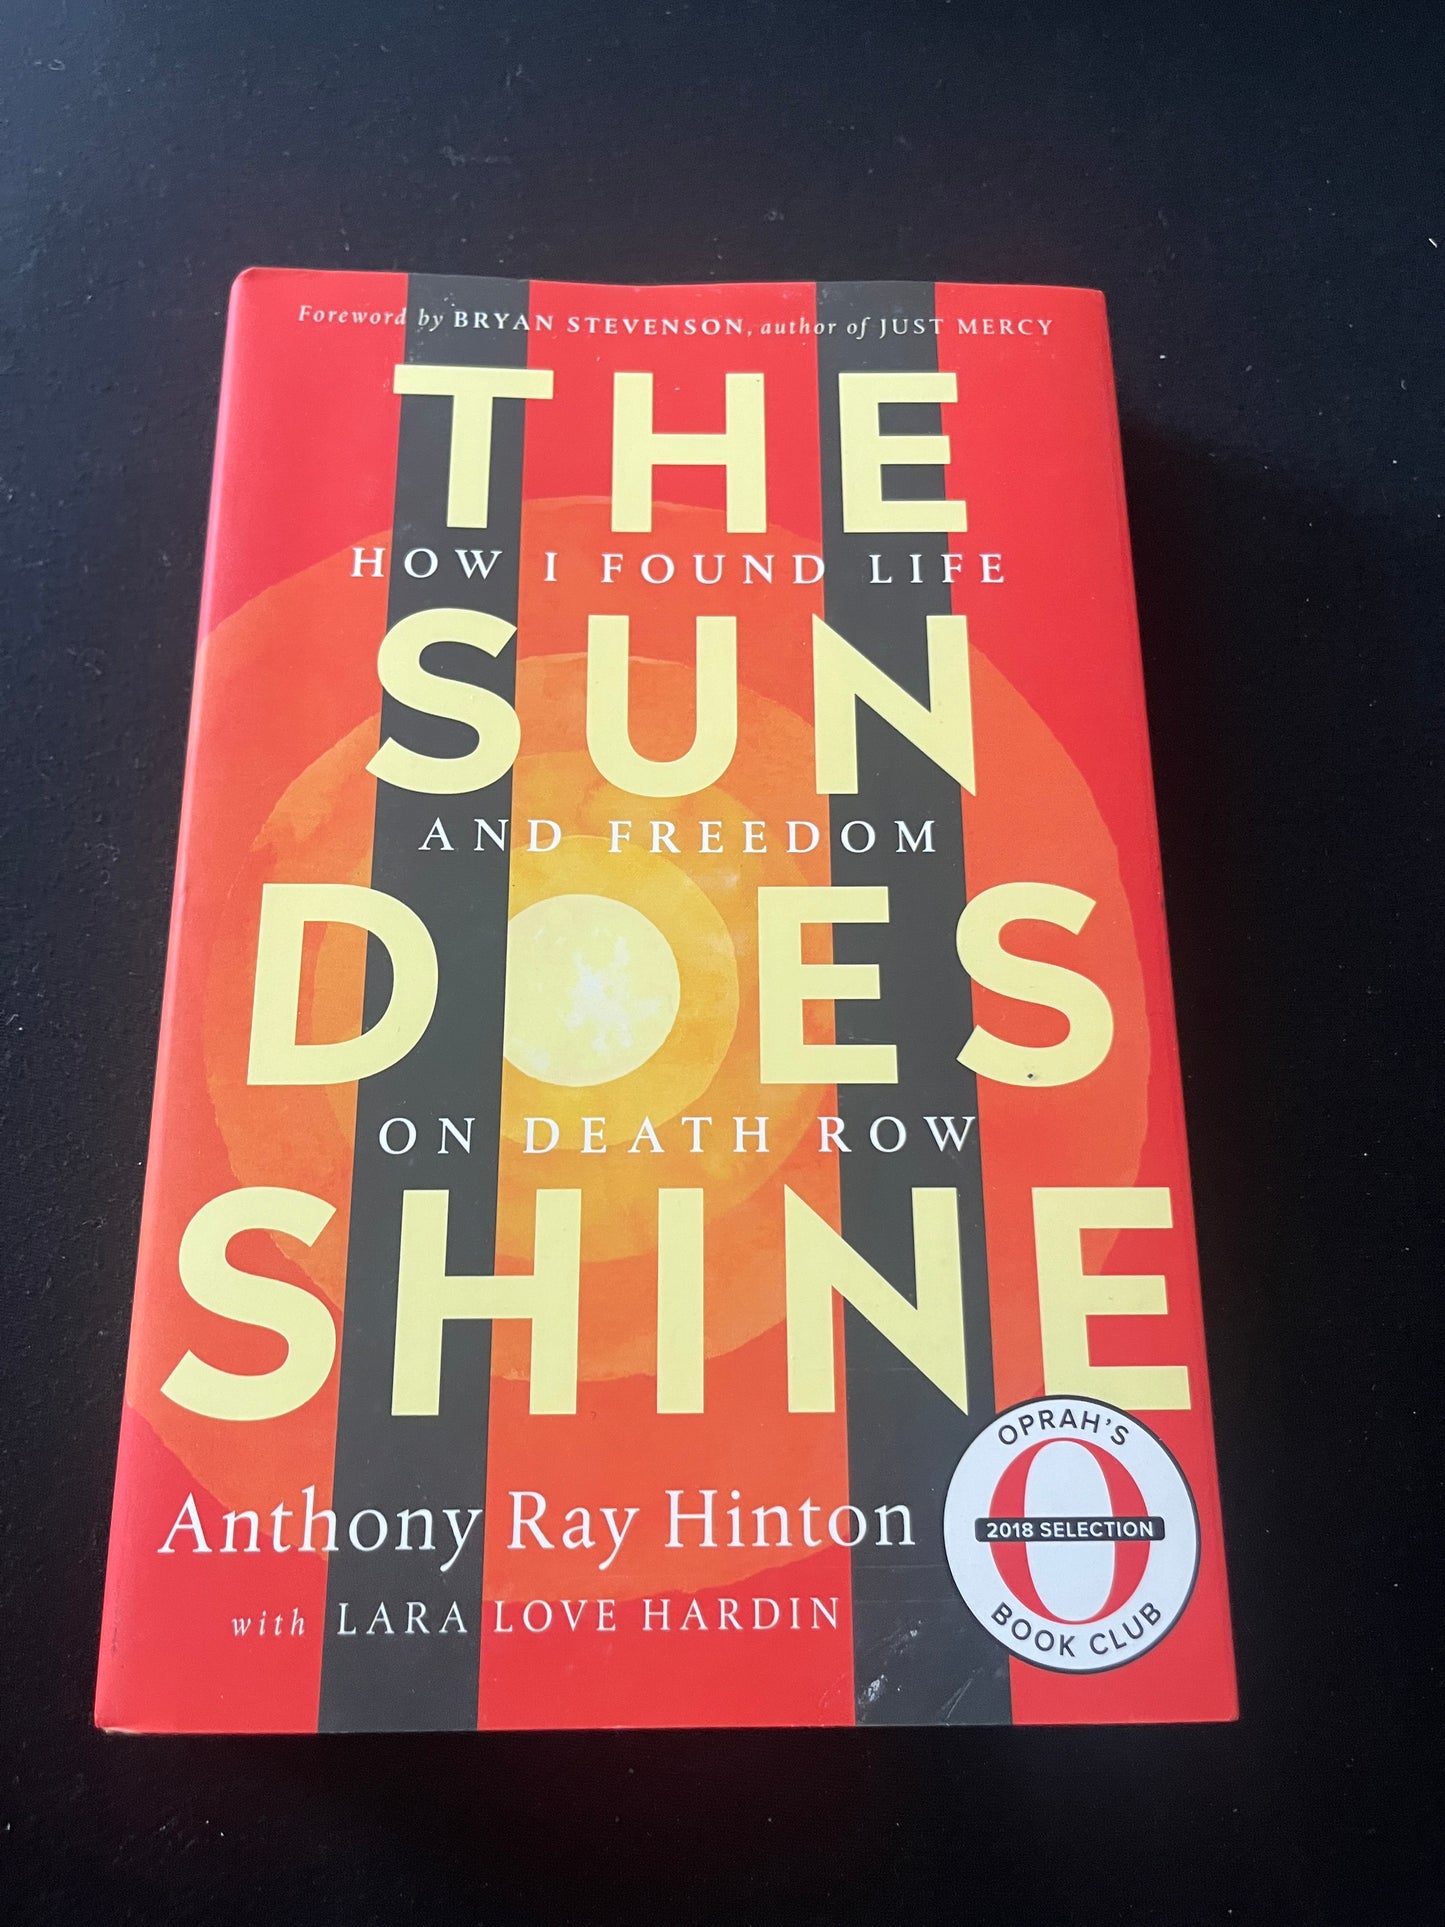 THE SUN DOES SHINE: How I Found Life and Freedom on Death Row by Anthony Ray Hinton